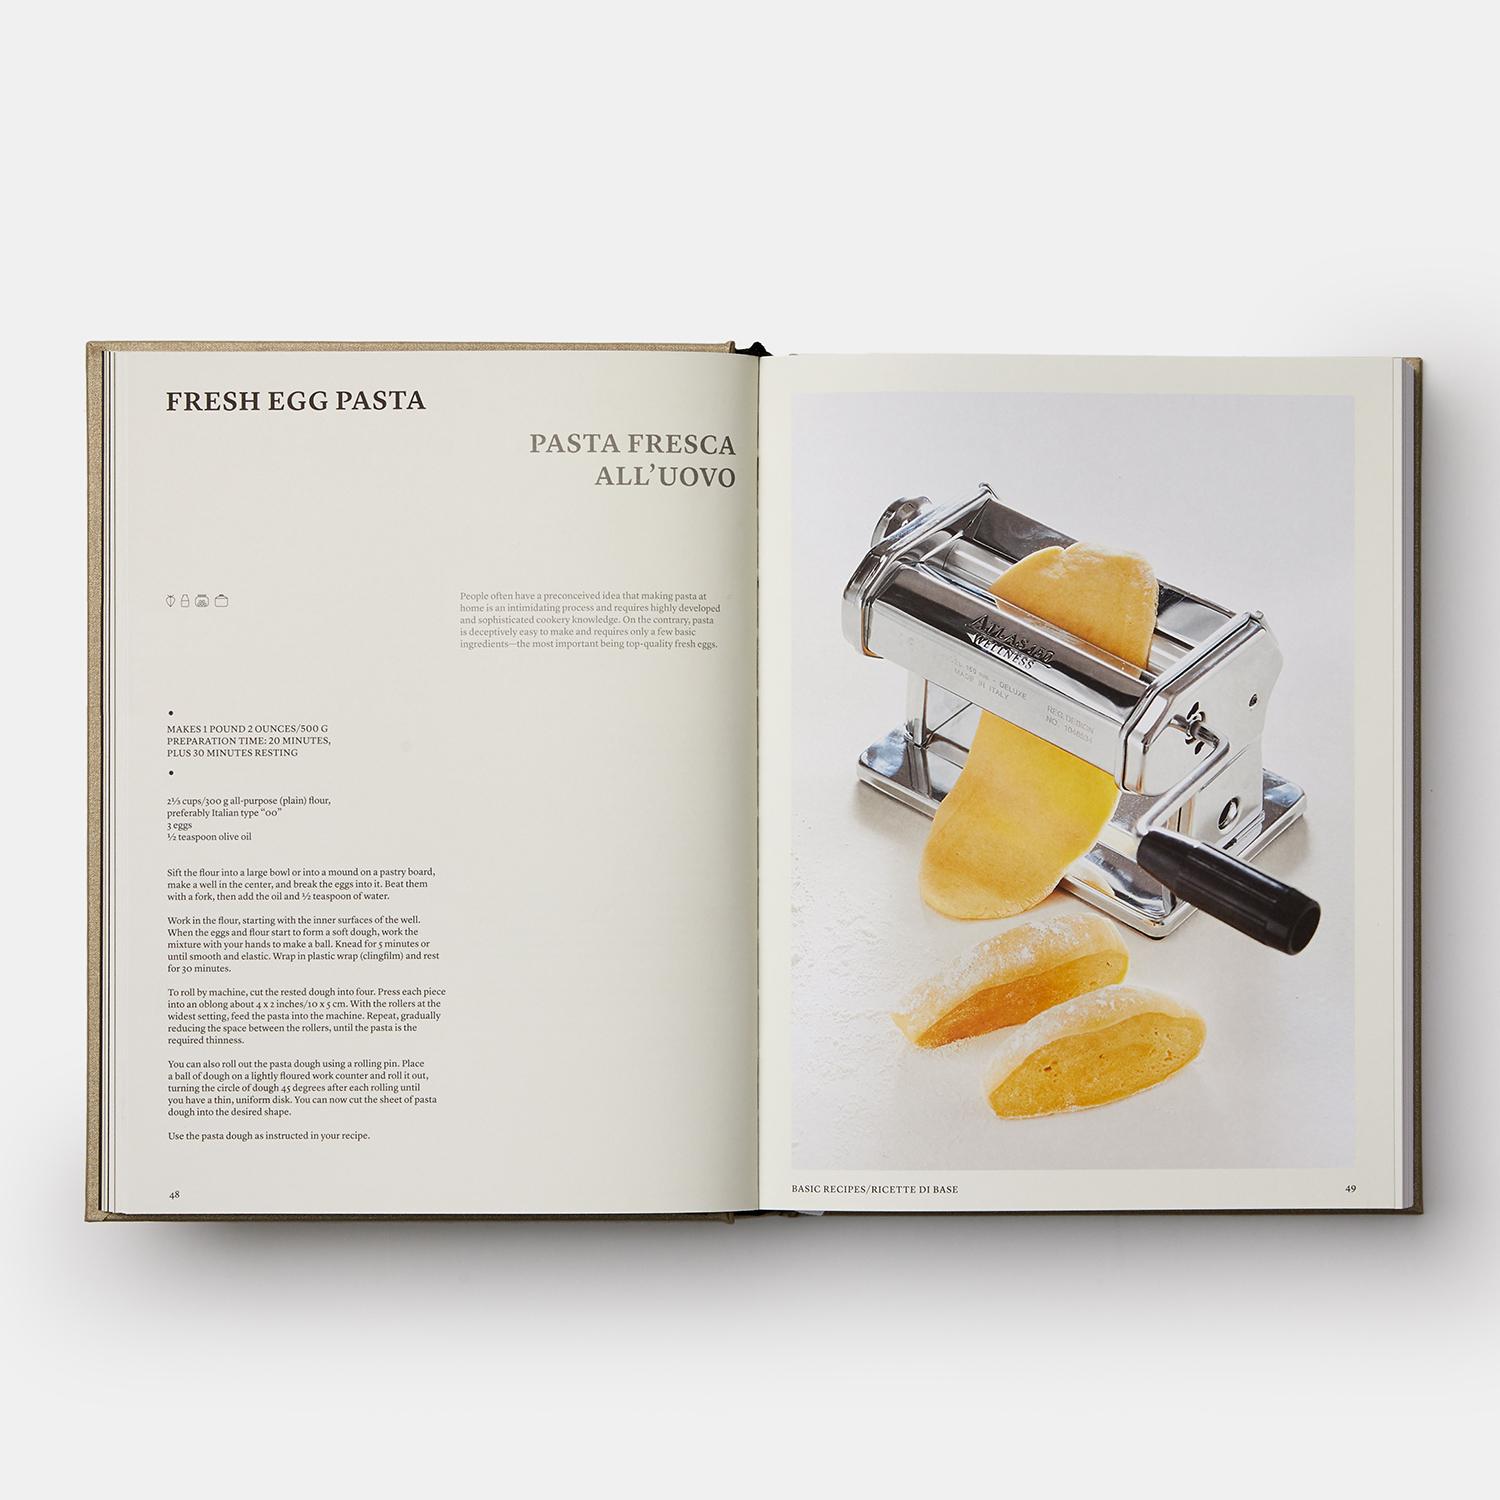 A luxurious collection of the best recipes from the world's leading Italian cookbook - with all new photography and design

First published in 1950, Il Cucchiaio d'Argento, or its English-language offspring The Silver Spoon, is the ultimate